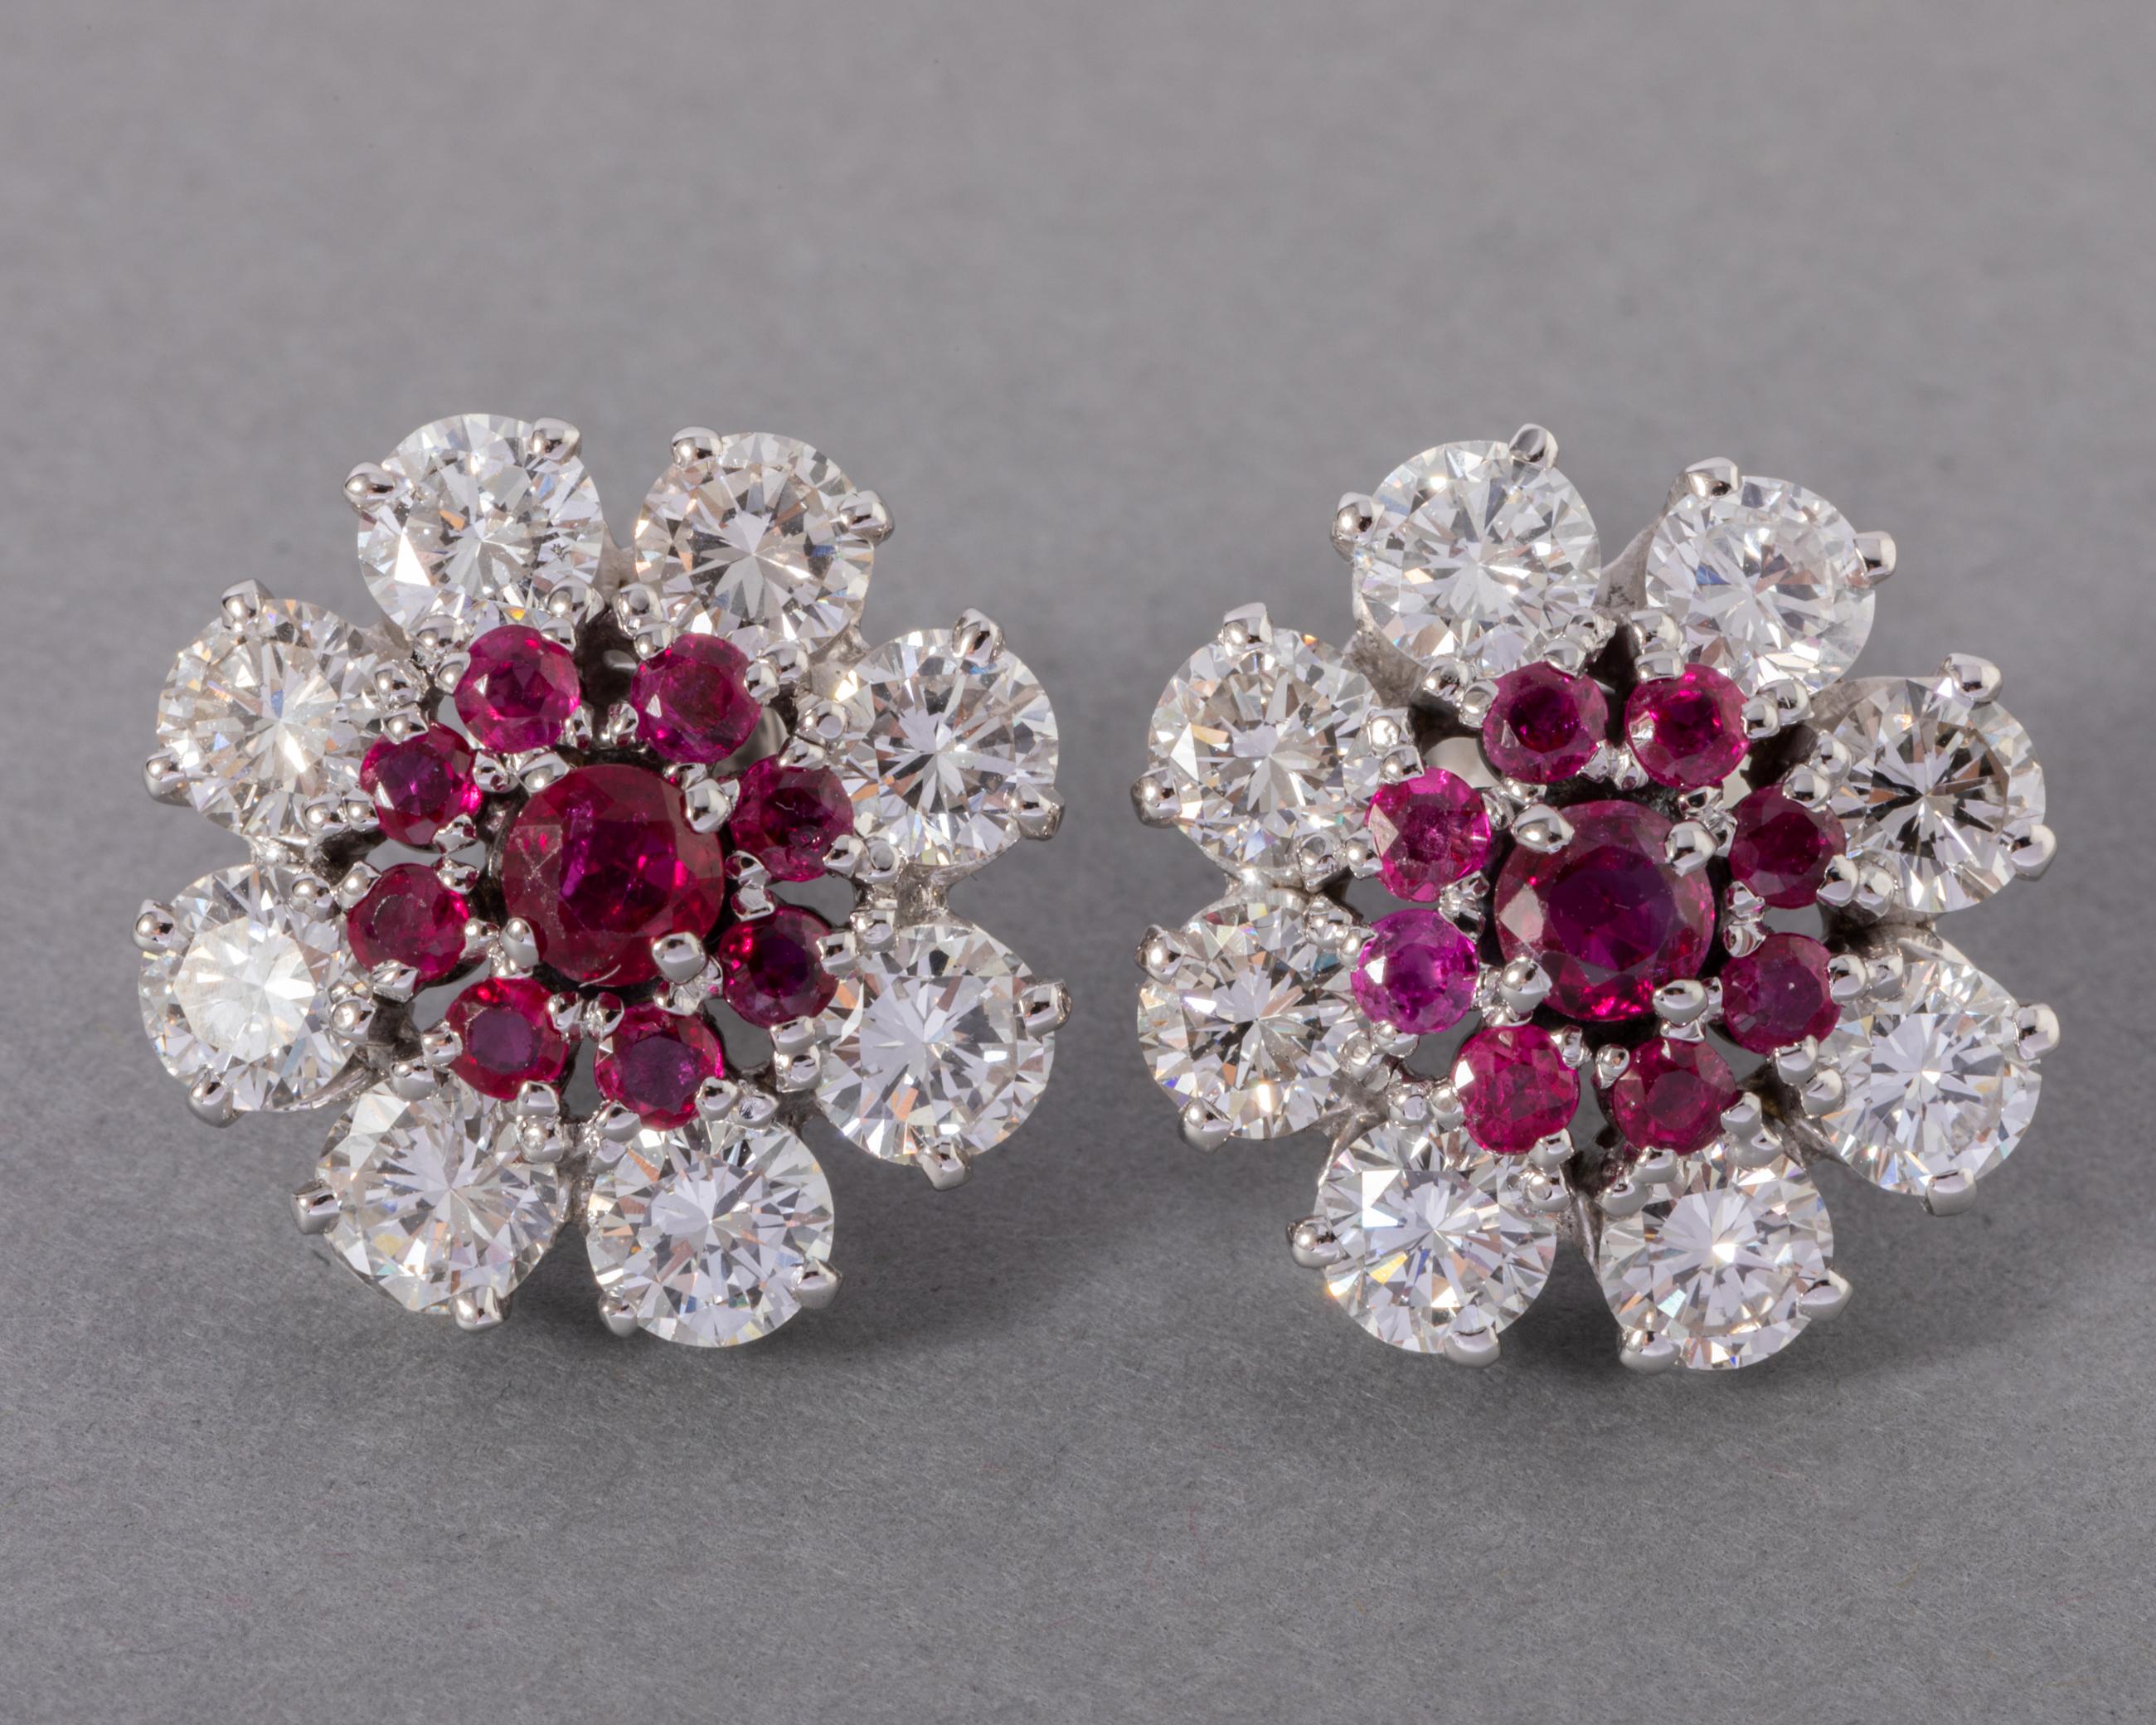 4 Carats Diamonds and 1 Carat Rubies Vintage Earrings In Good Condition For Sale In Saint-Ouen, FR